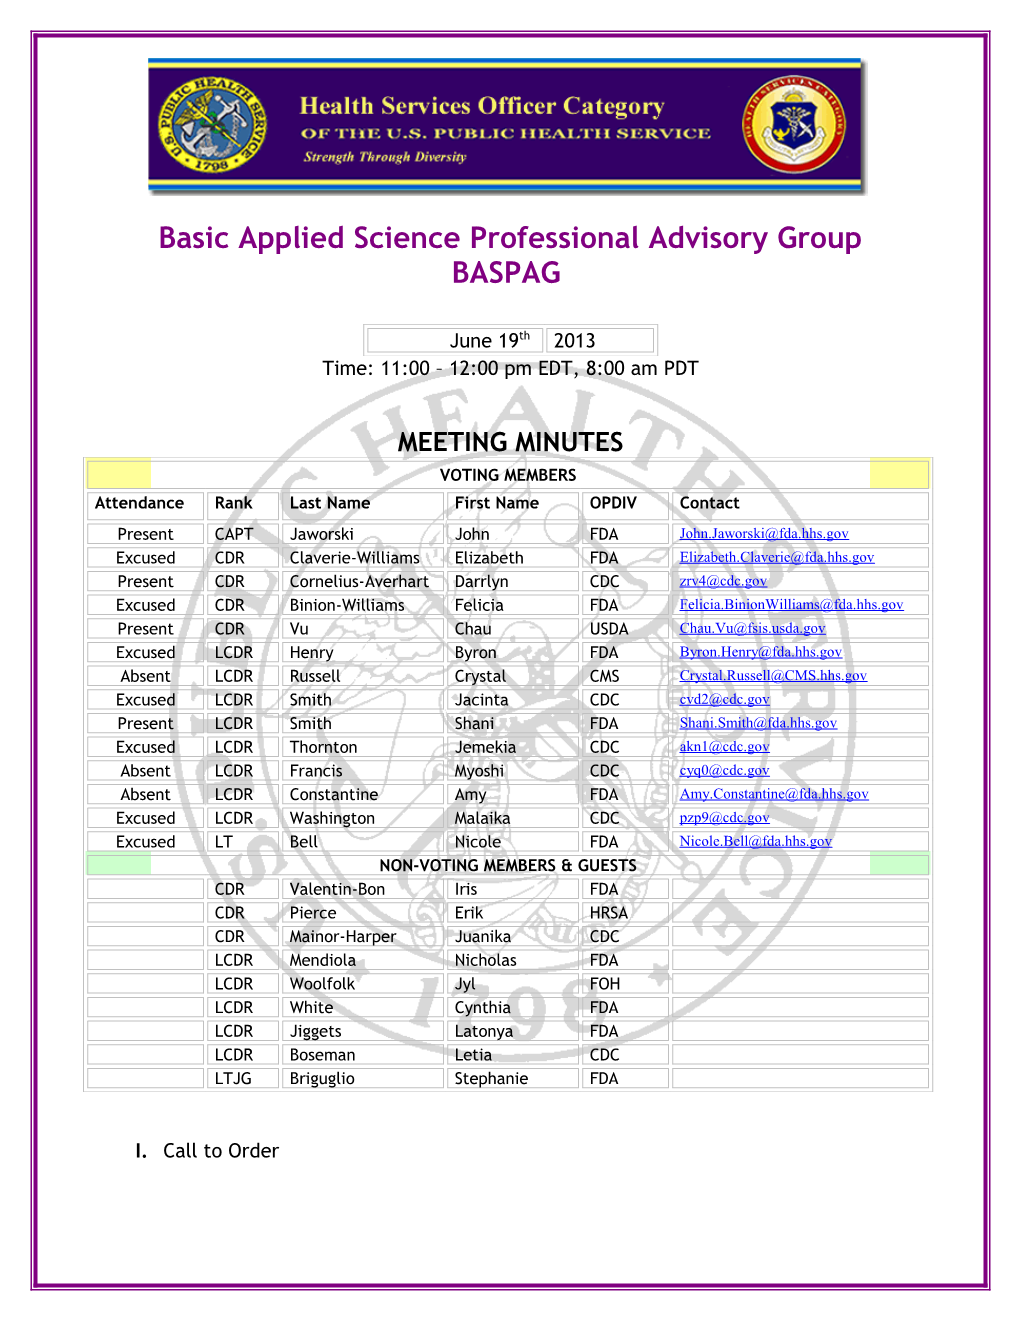 Basic Applied Science Professional Advisory Group s1